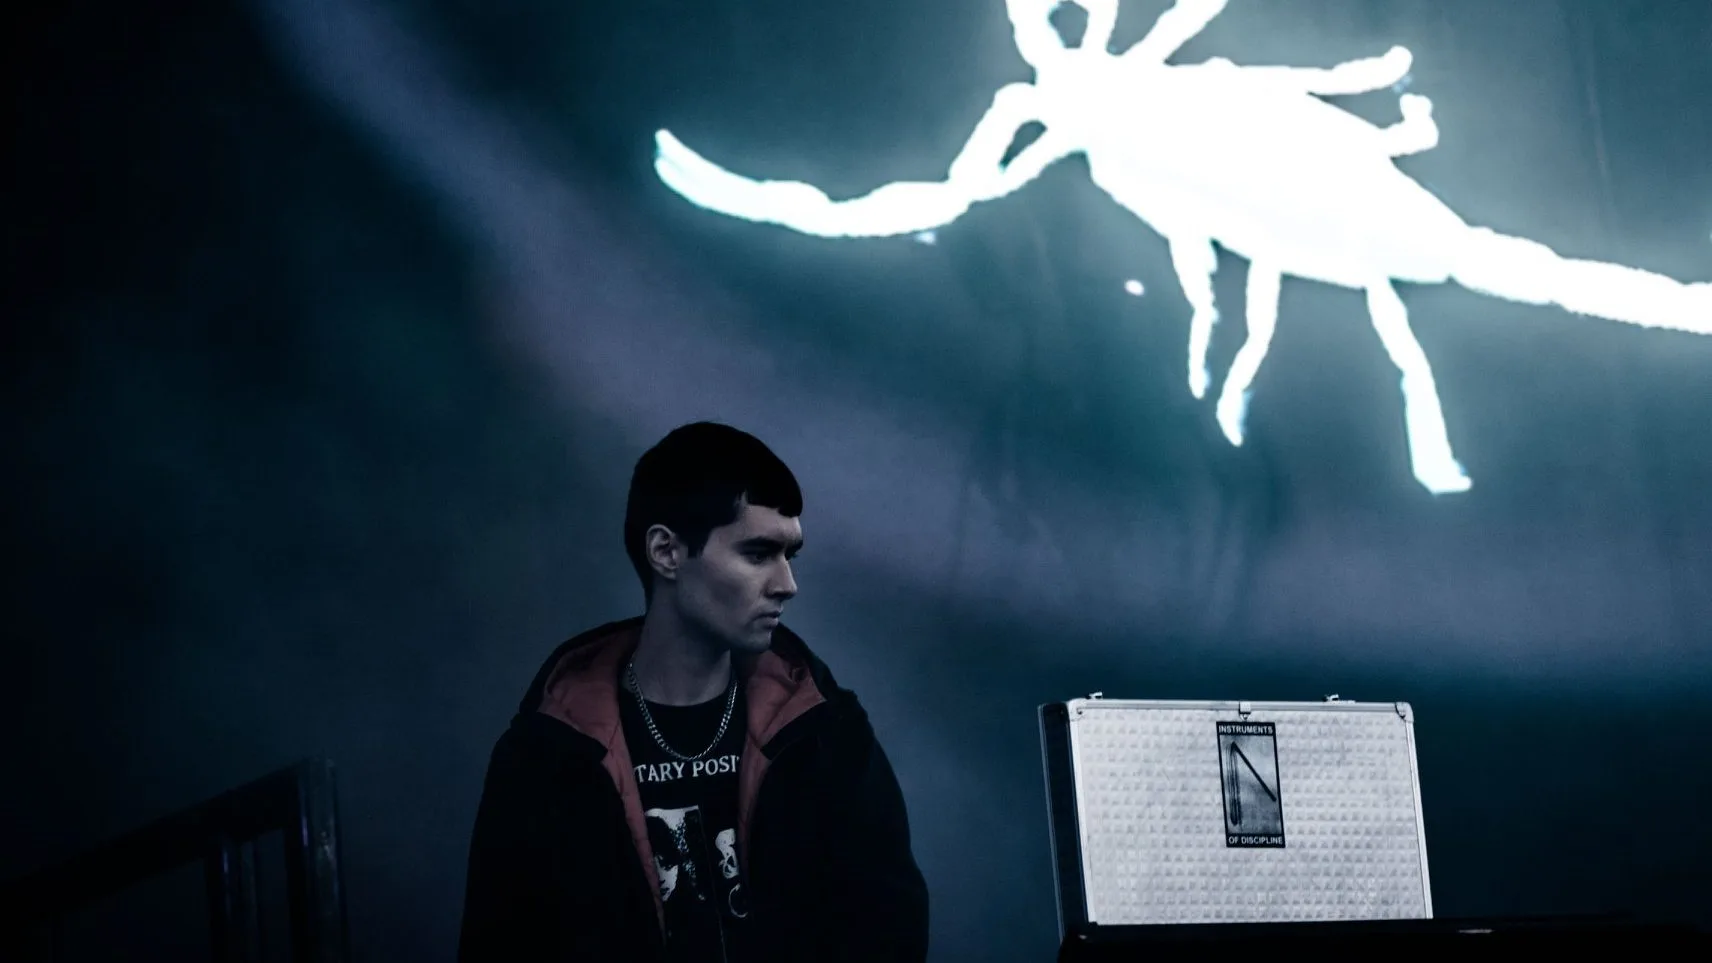 The artist Schacke against a dark gray background with a scorpion.